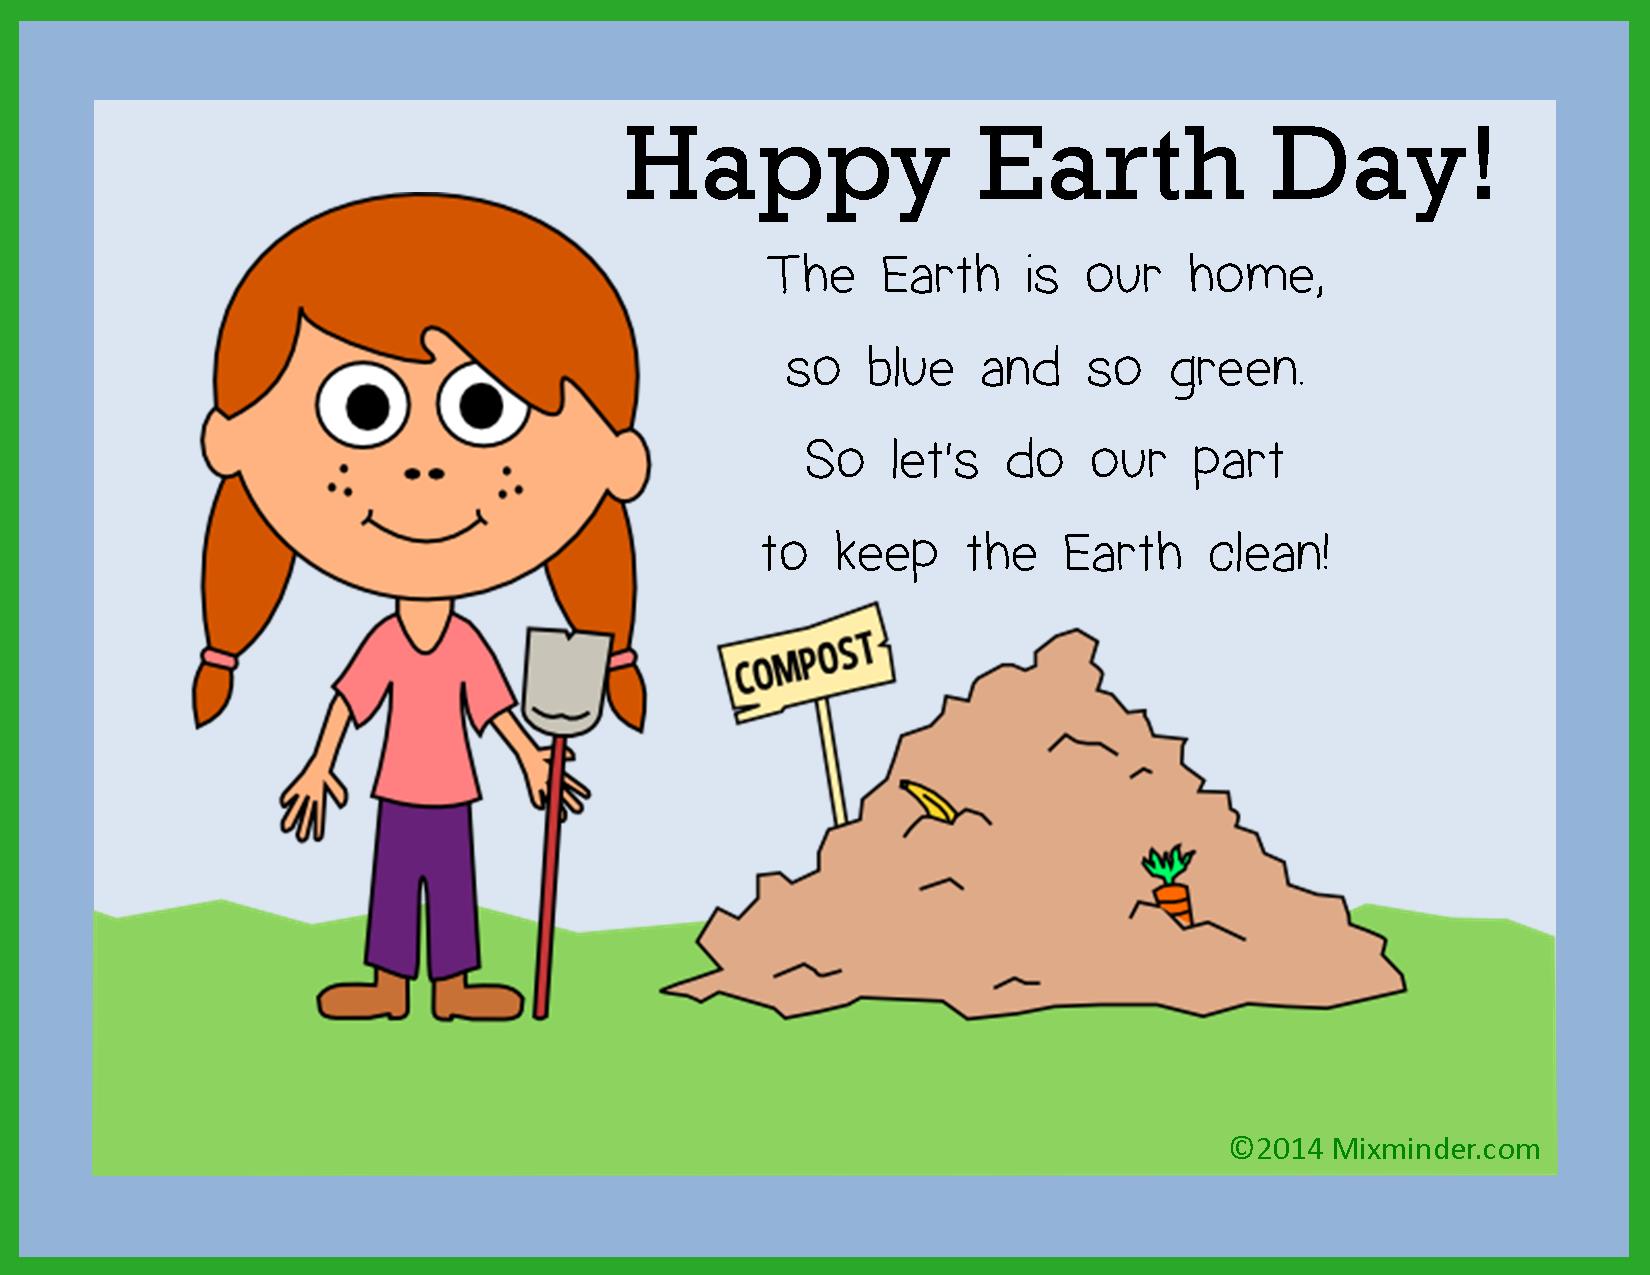 A Poem for Earth Day